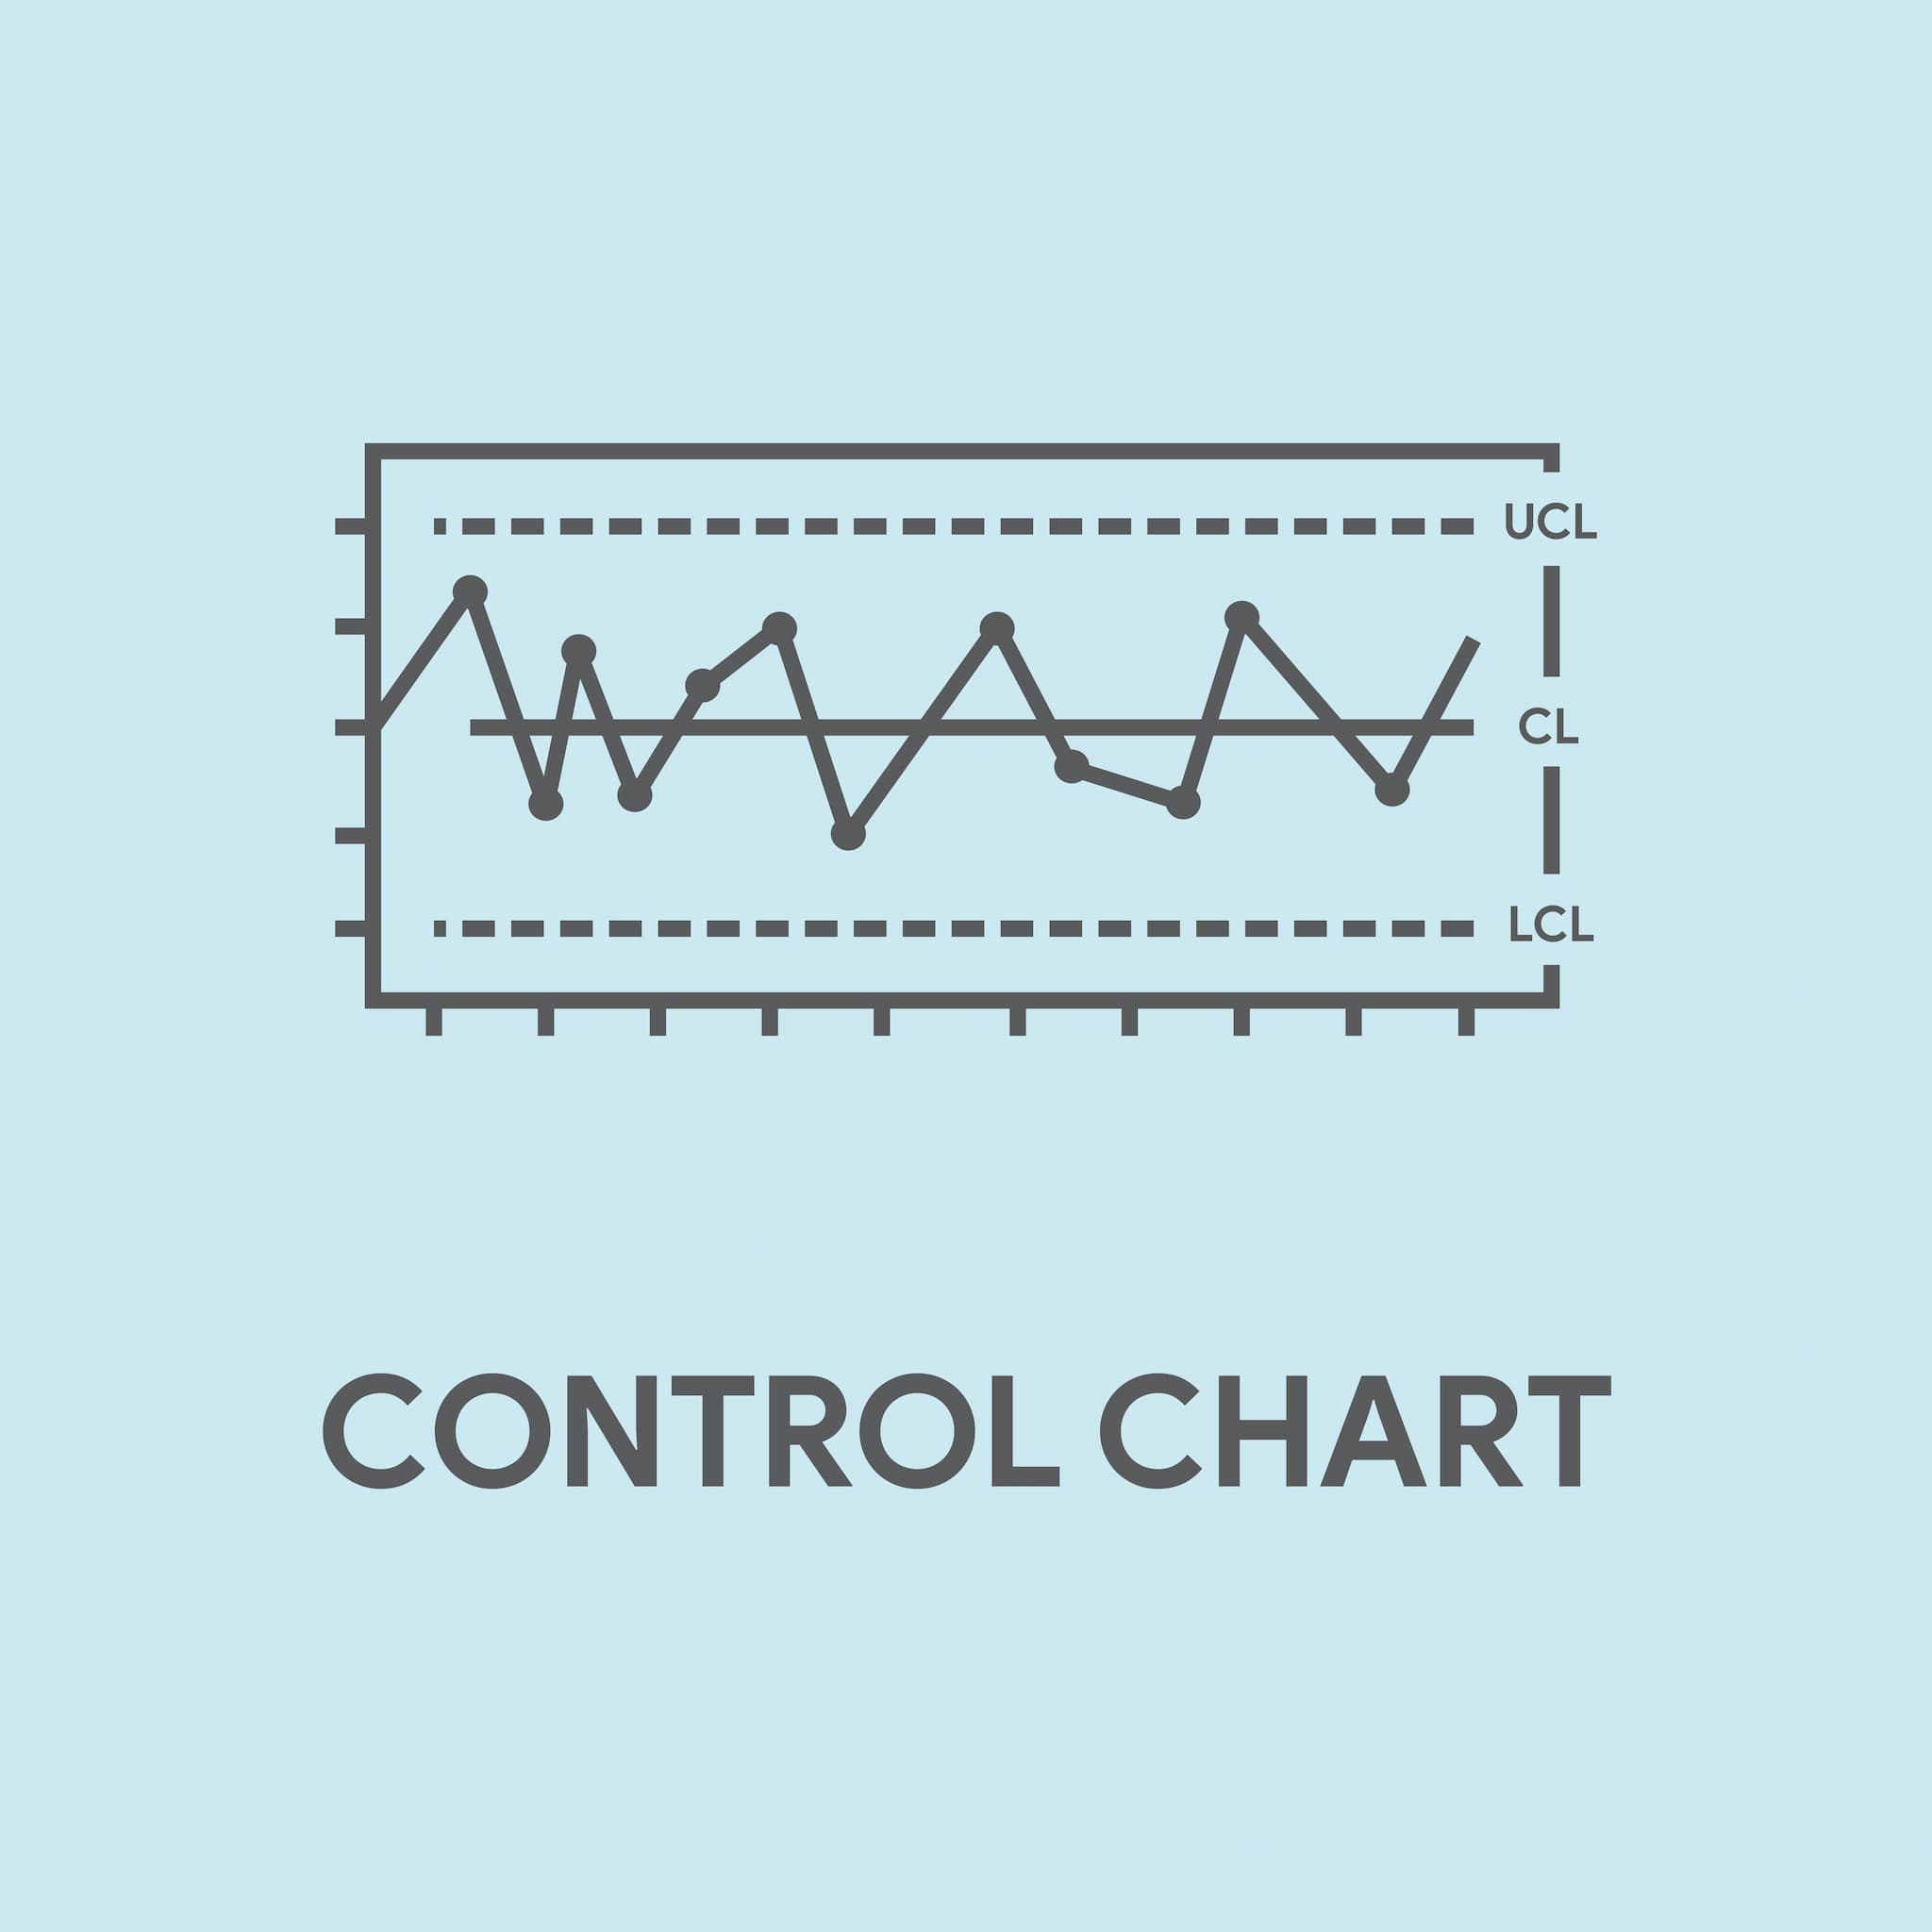 Control chart with labelled Upper Control Line, Control Line, and Lower Control Line